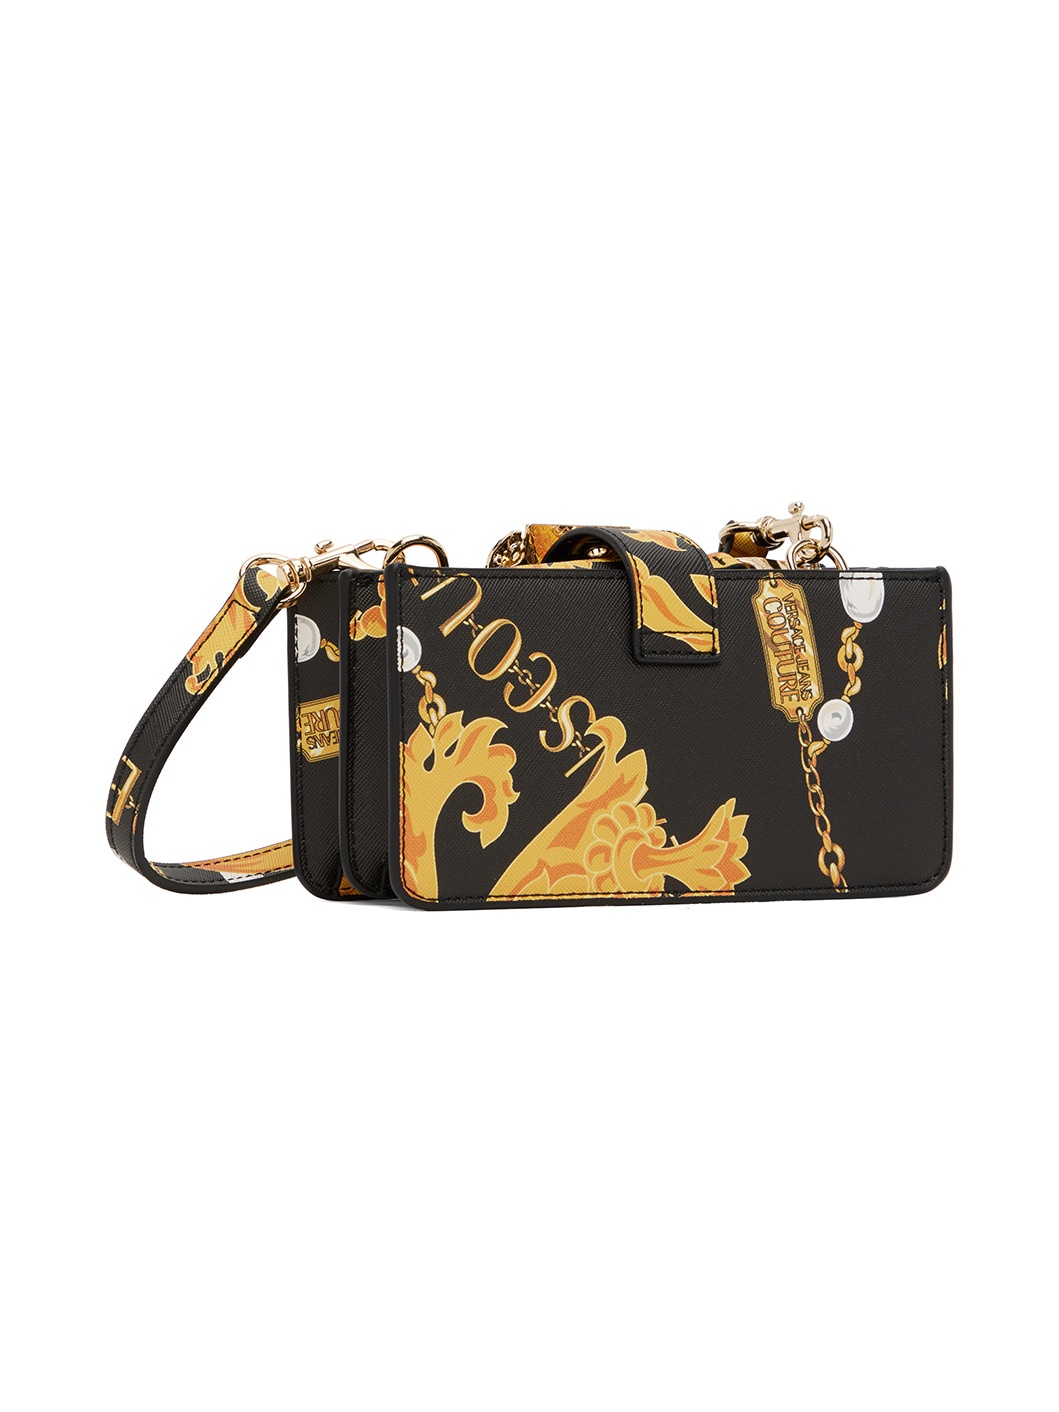 Black & Gold Couture 01 Bag - 3